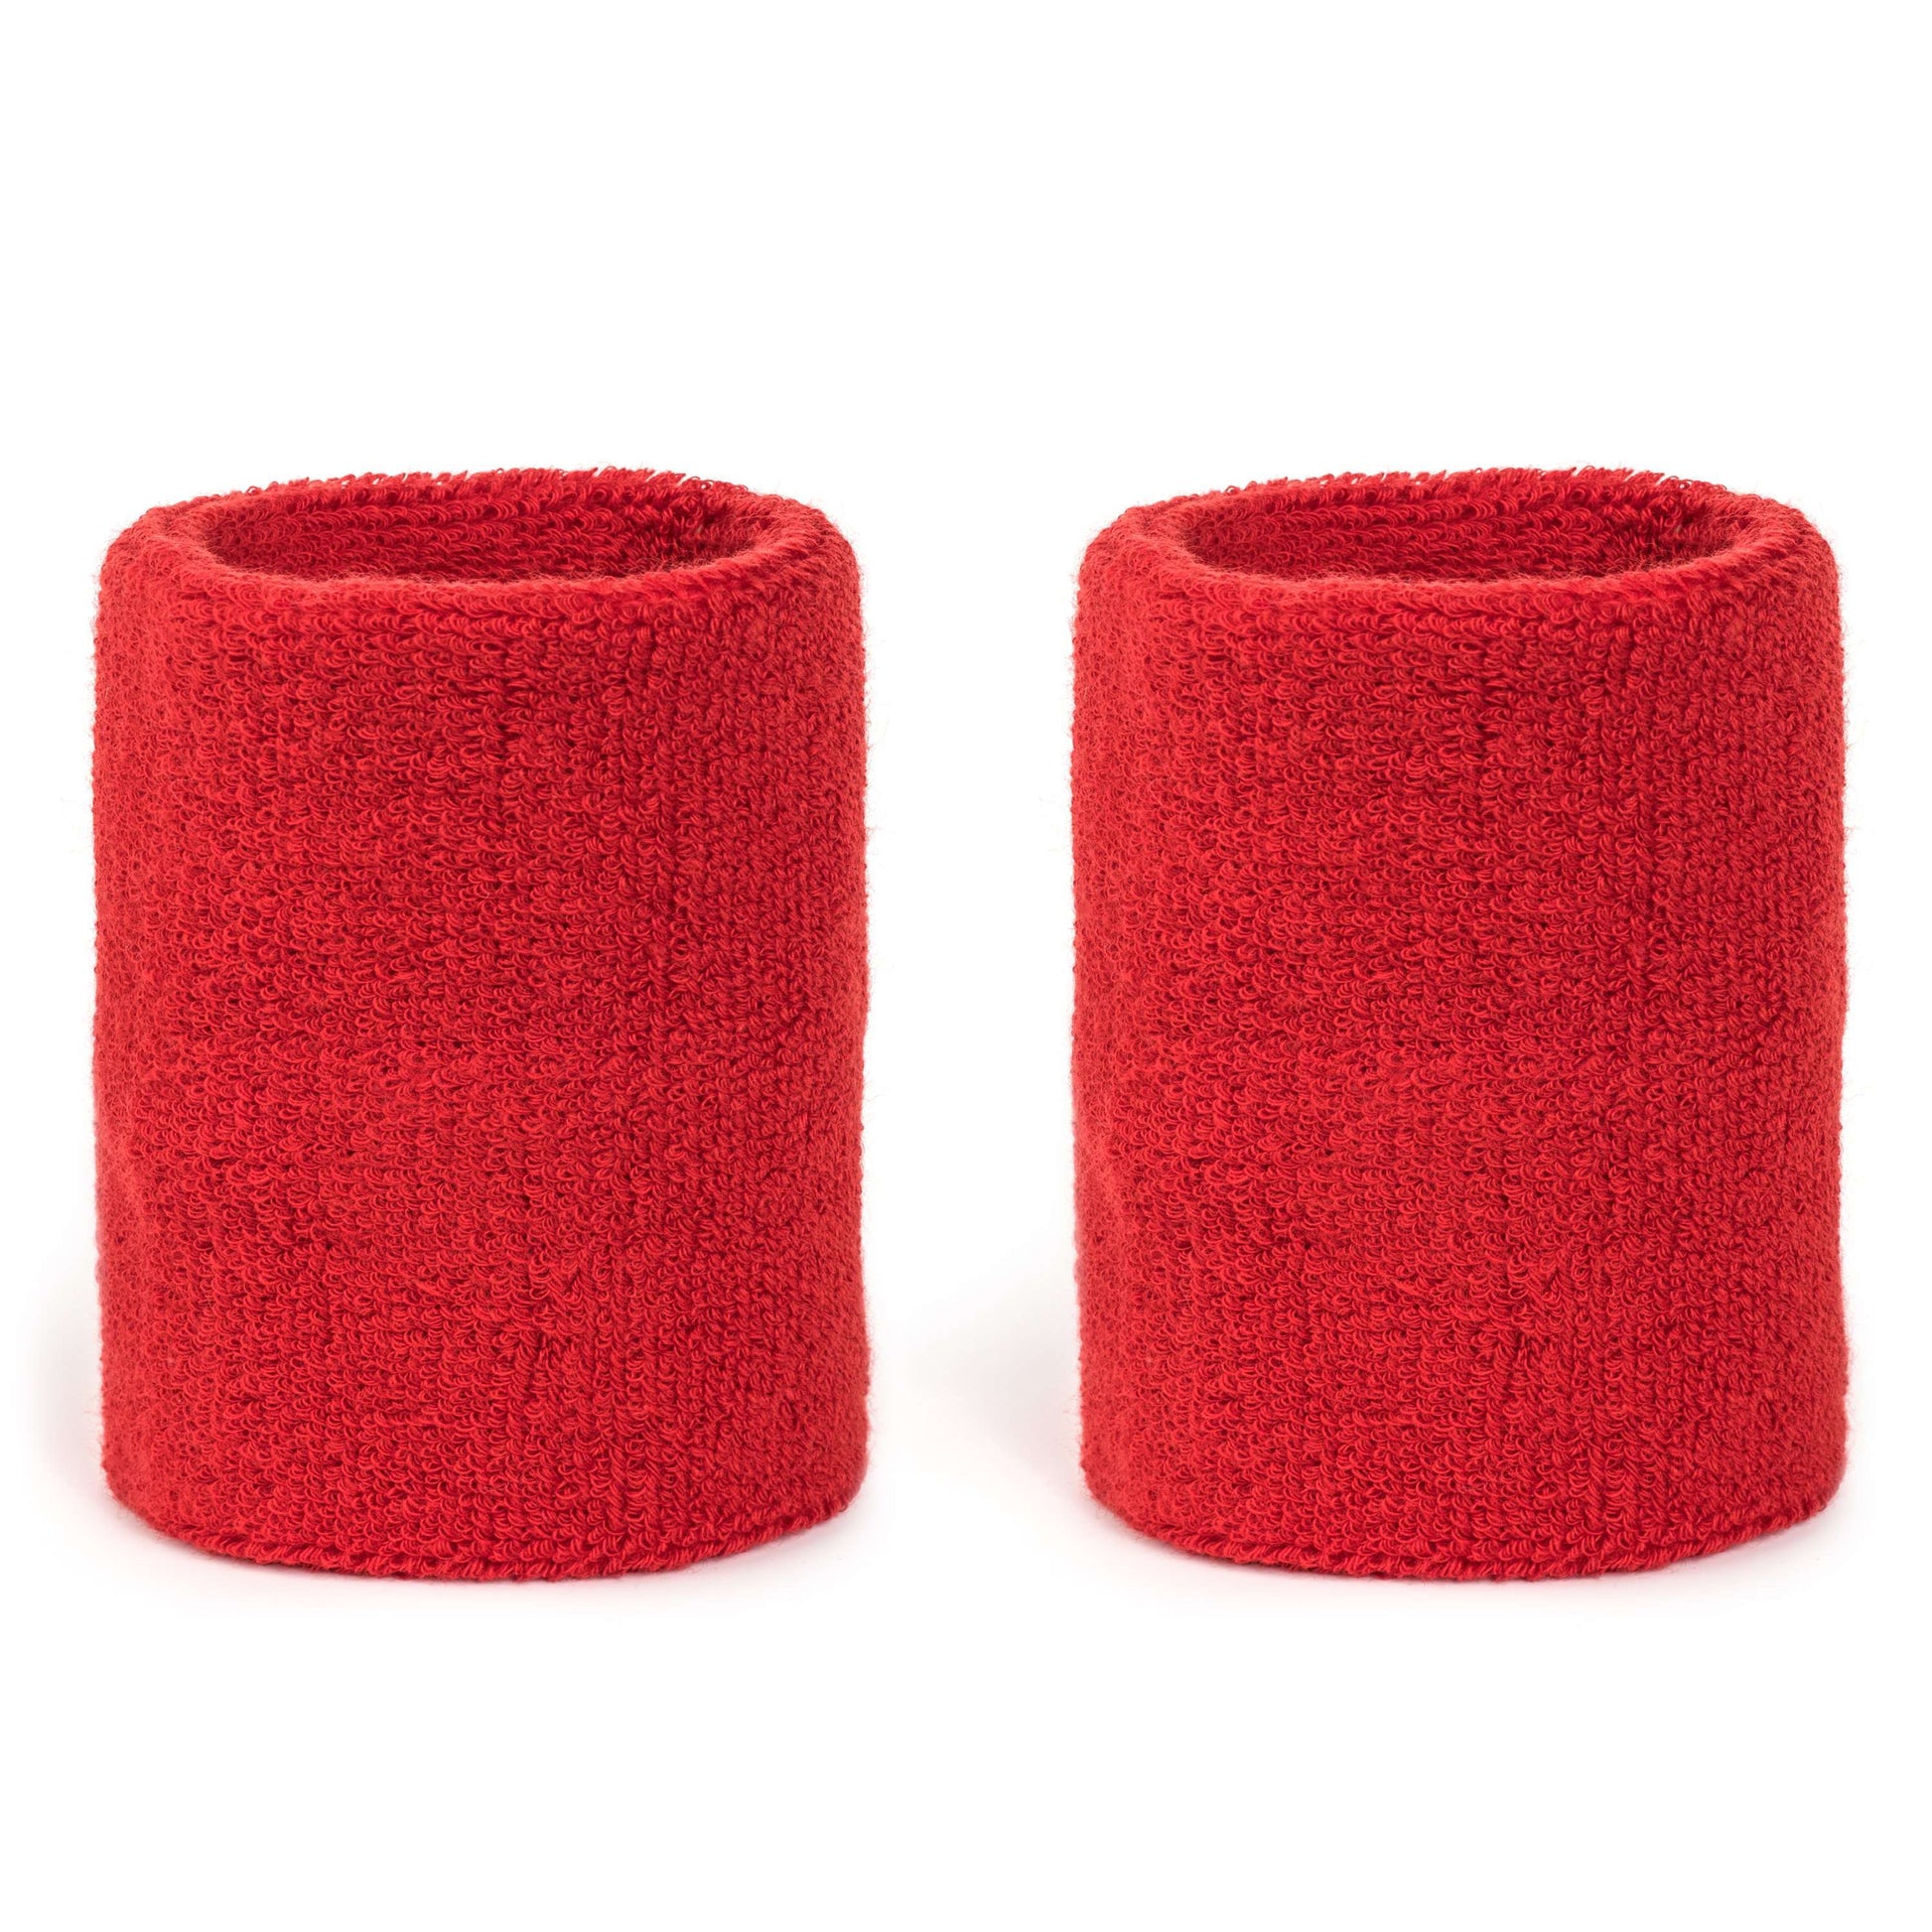 Suddora 4 Inch Armband Pair - Red